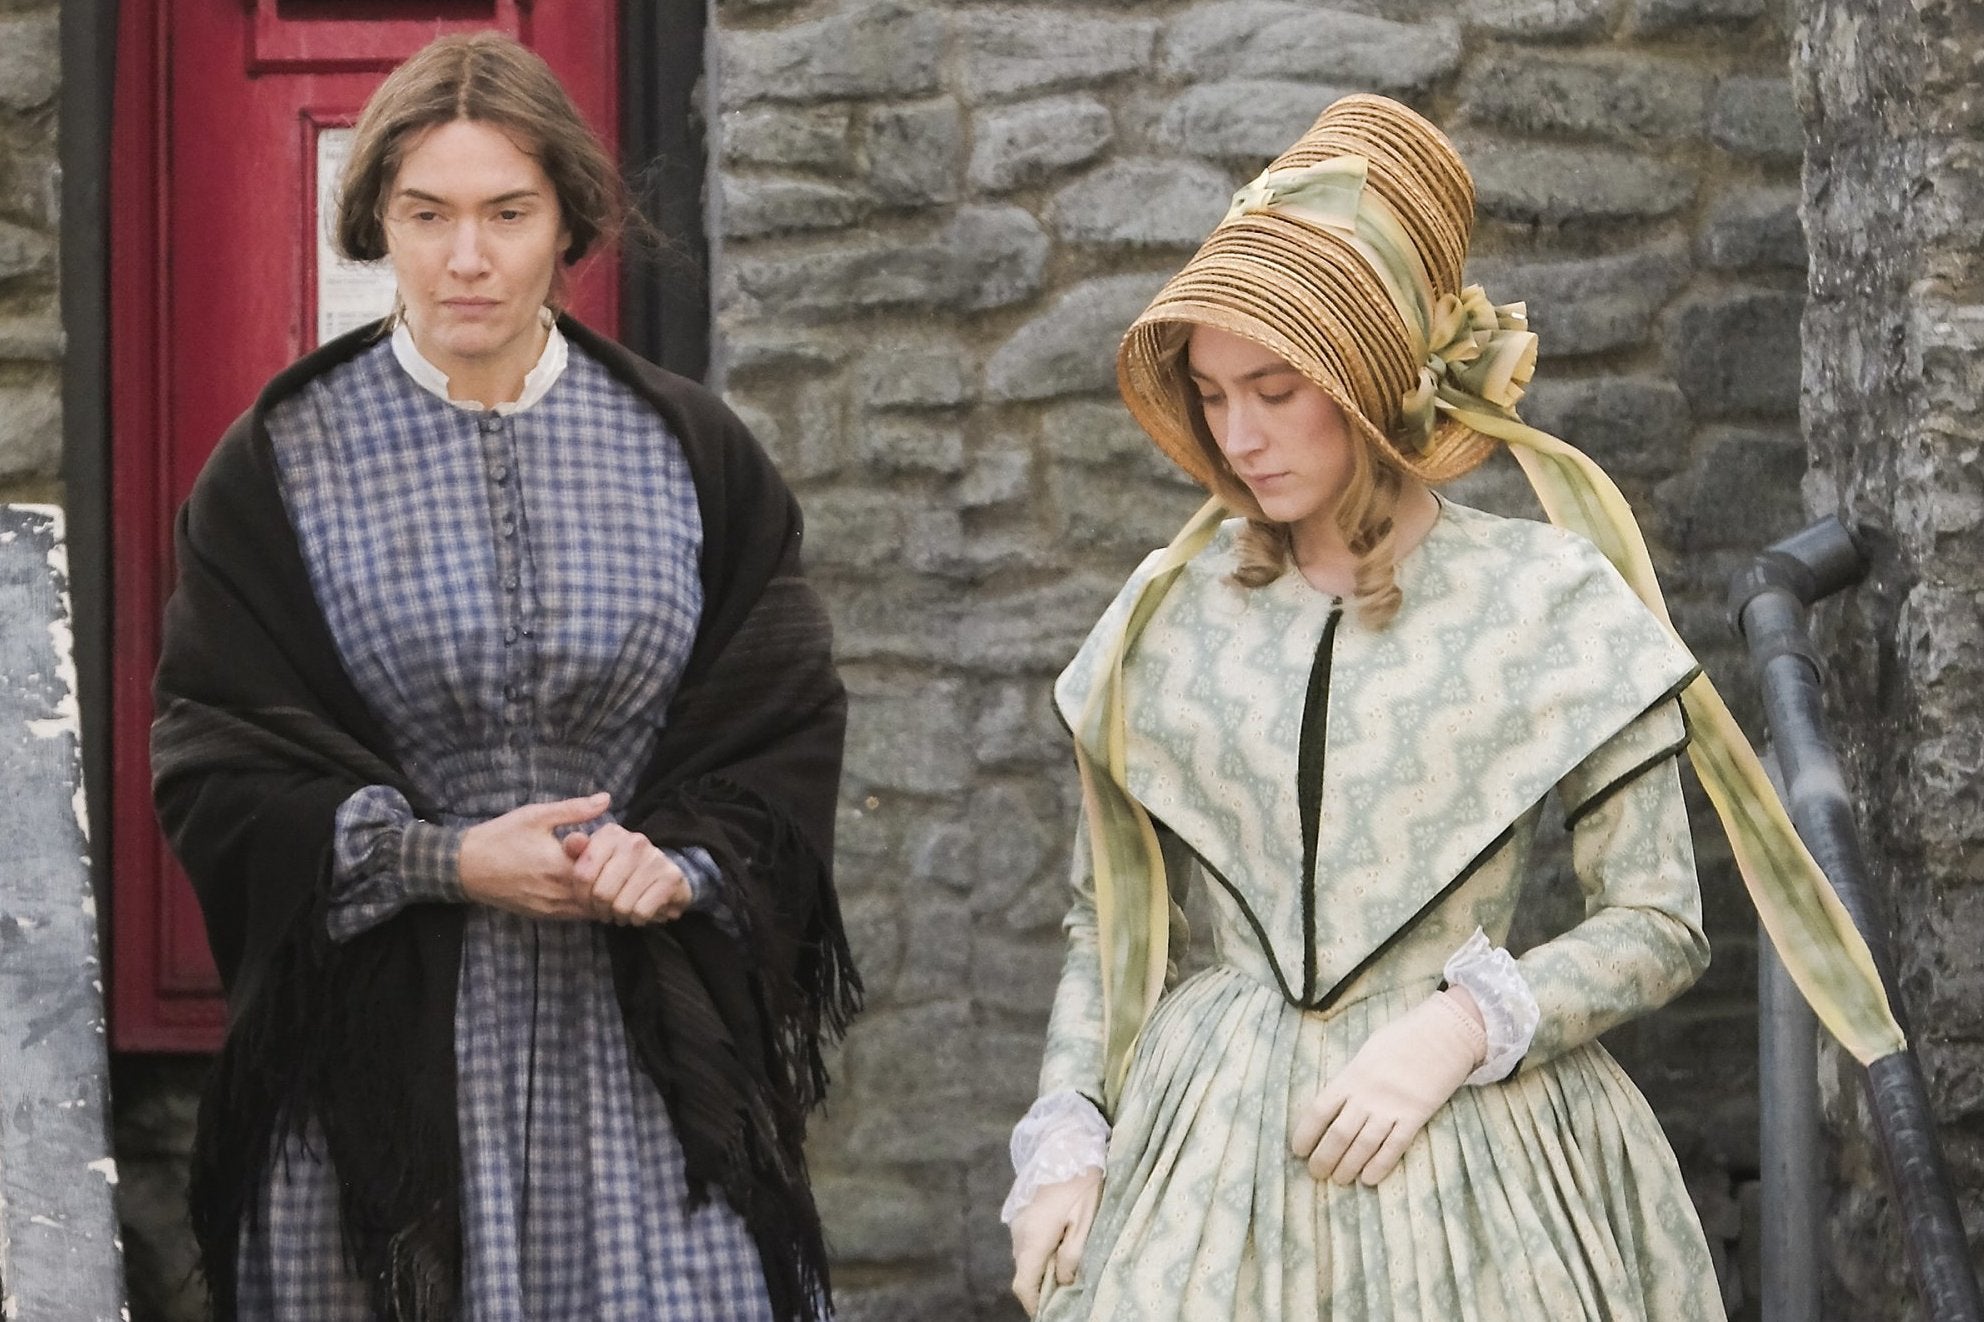 Kate Winslet and Saoirse Ronan on the set of new period drama 'Ammonite'